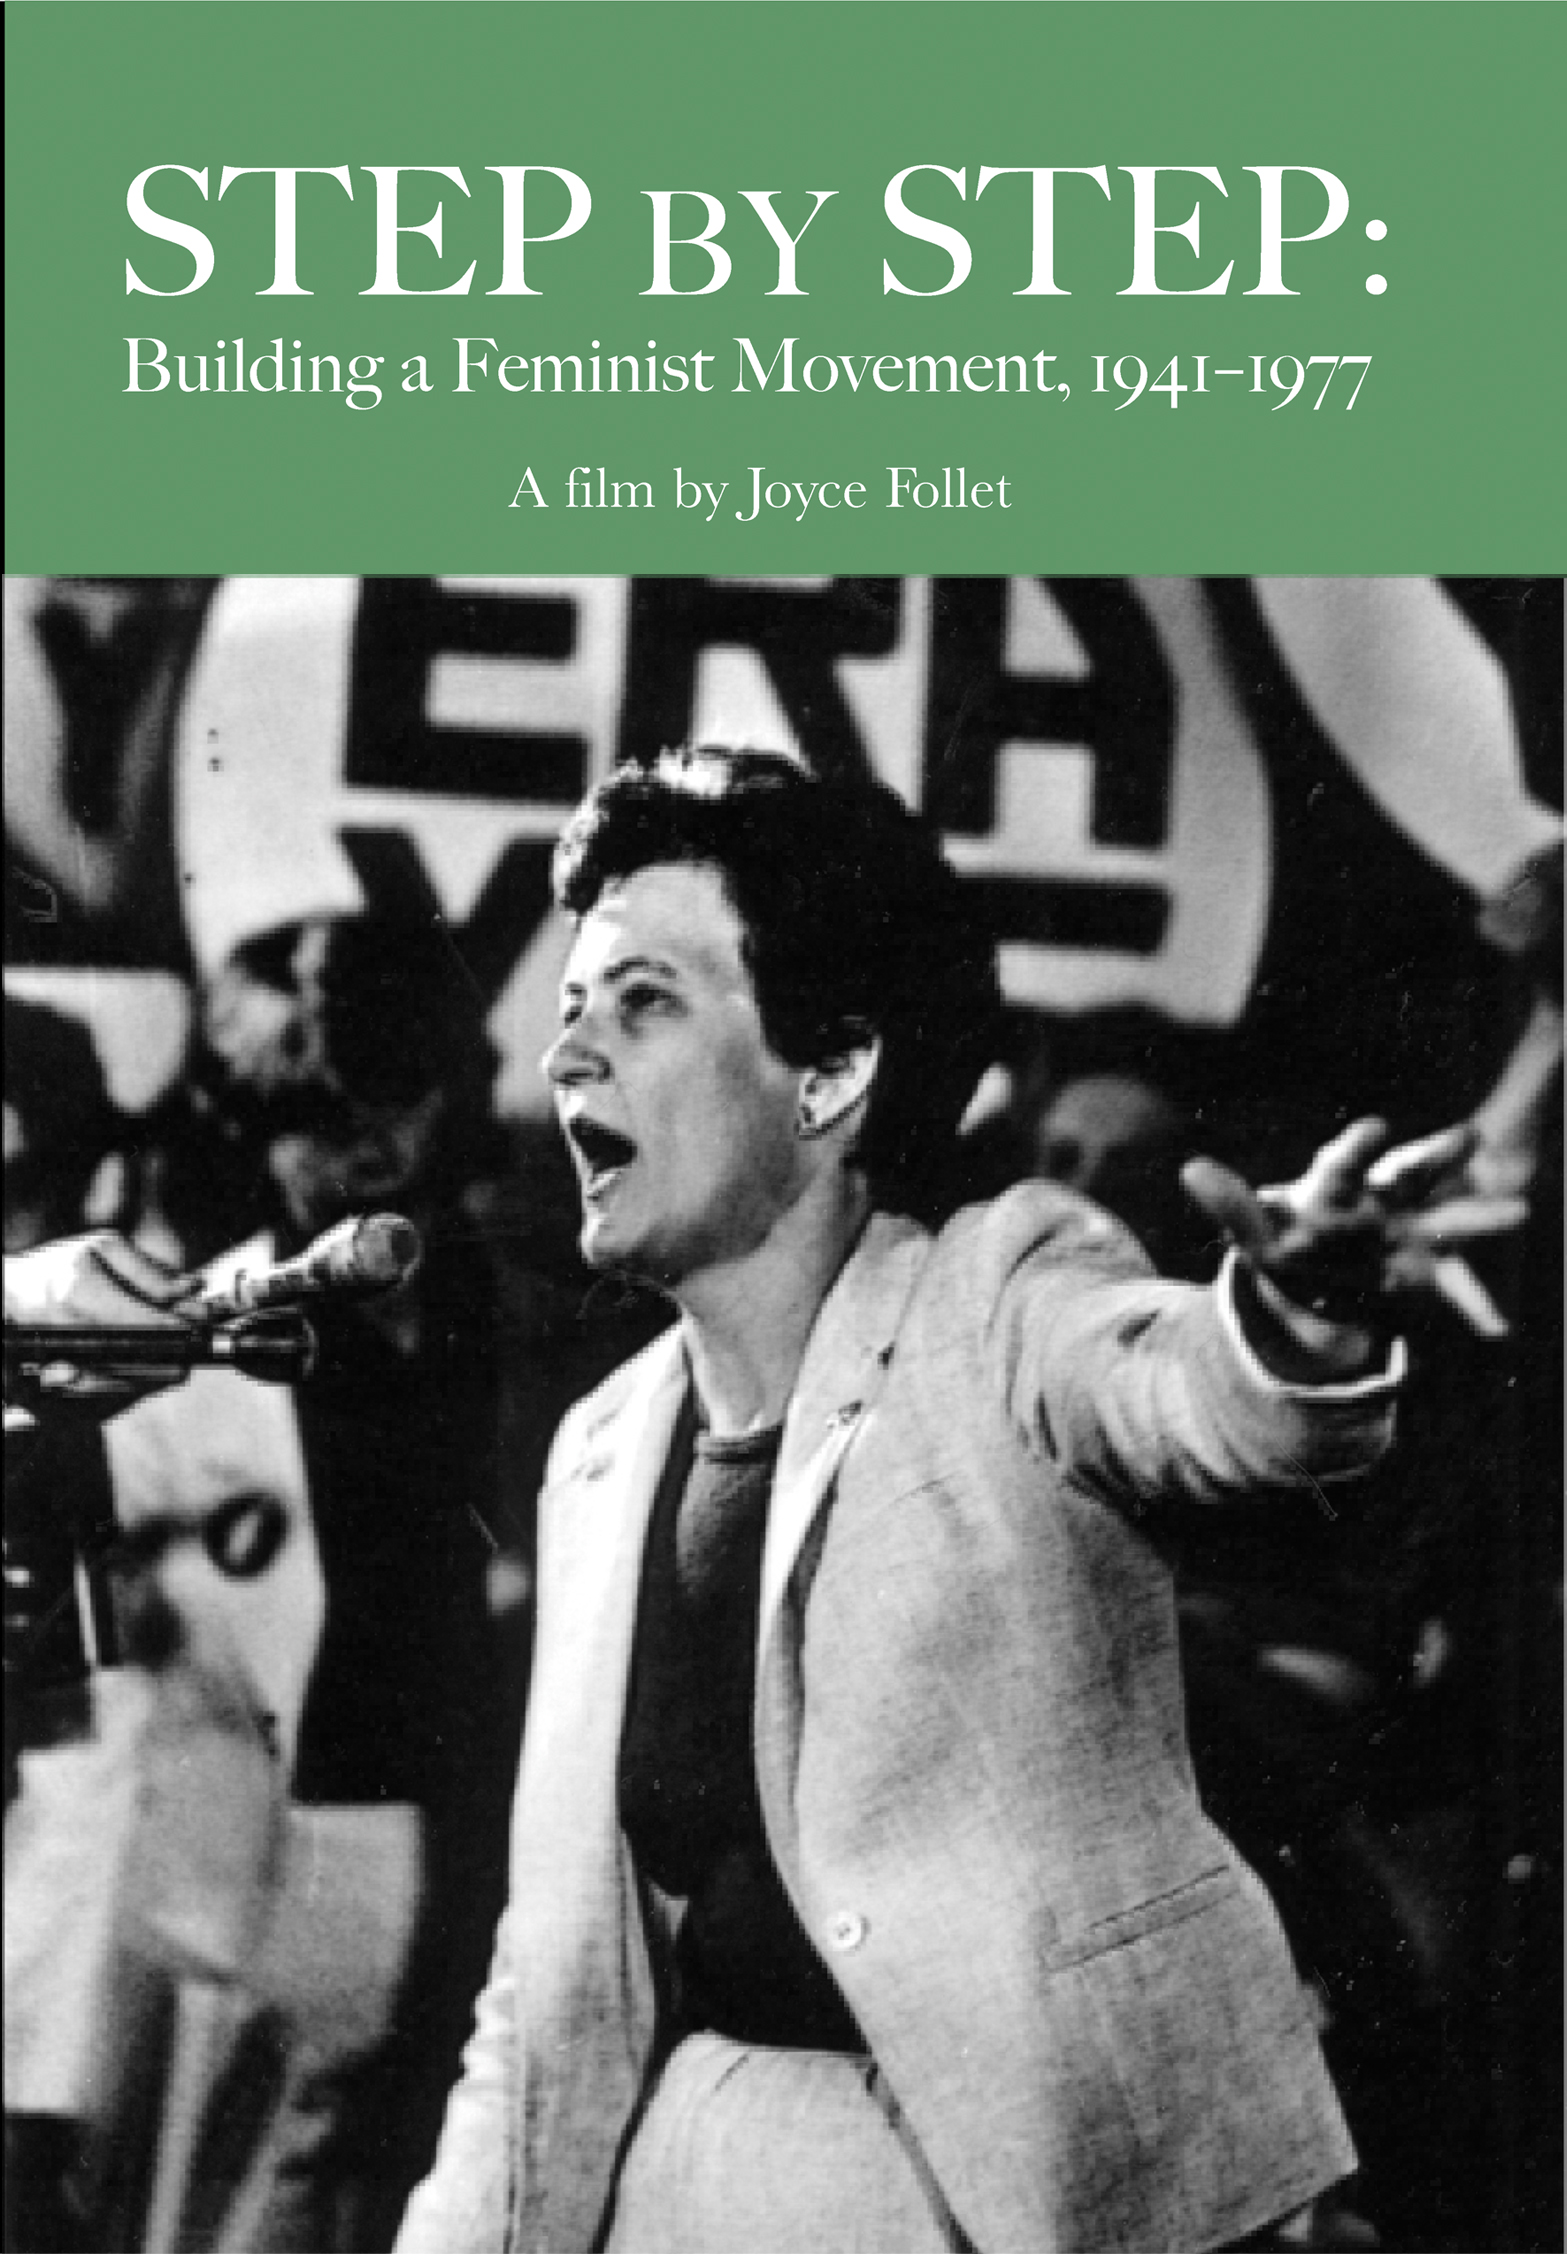 Step by Step: Building a Feminist Movement, 1941-1977 | Women Make ...